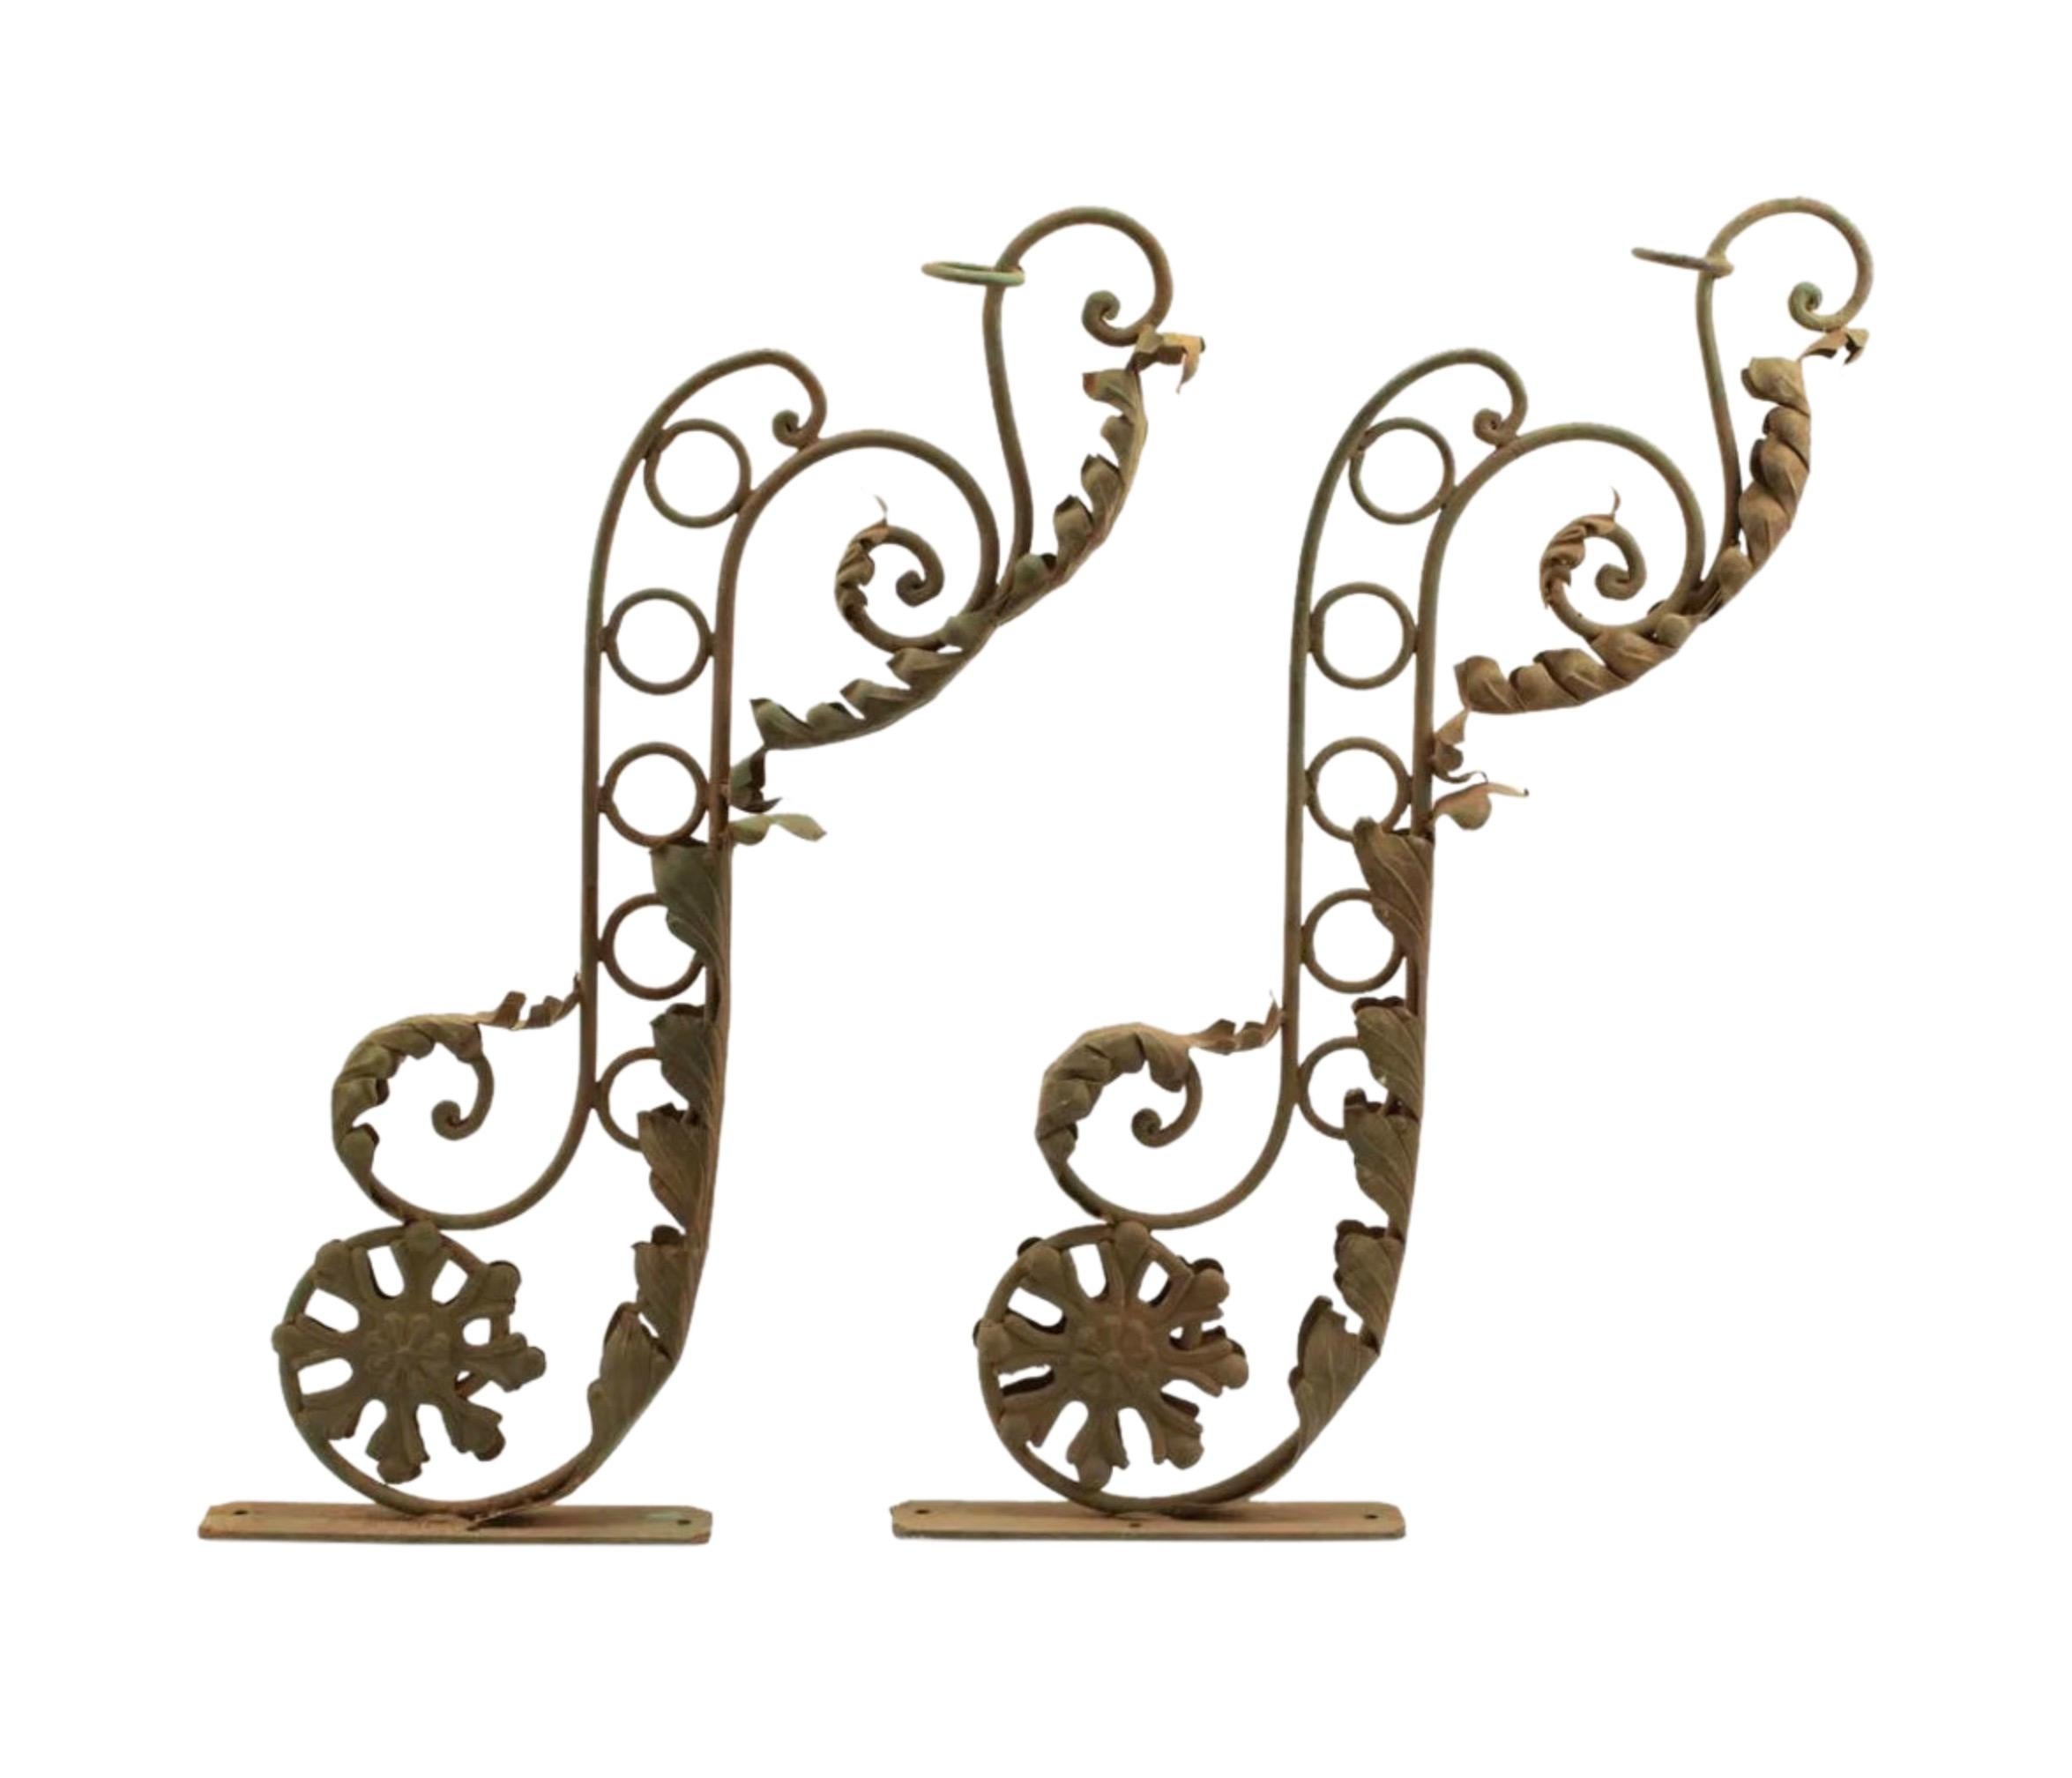 Hand forged pair of wrought iron foliate scroll sign brackets made in New Orleans. These were signage for a French Quarter Hotel. These are beautiful objects as is - or could be made into grand electrified or candle sconces.